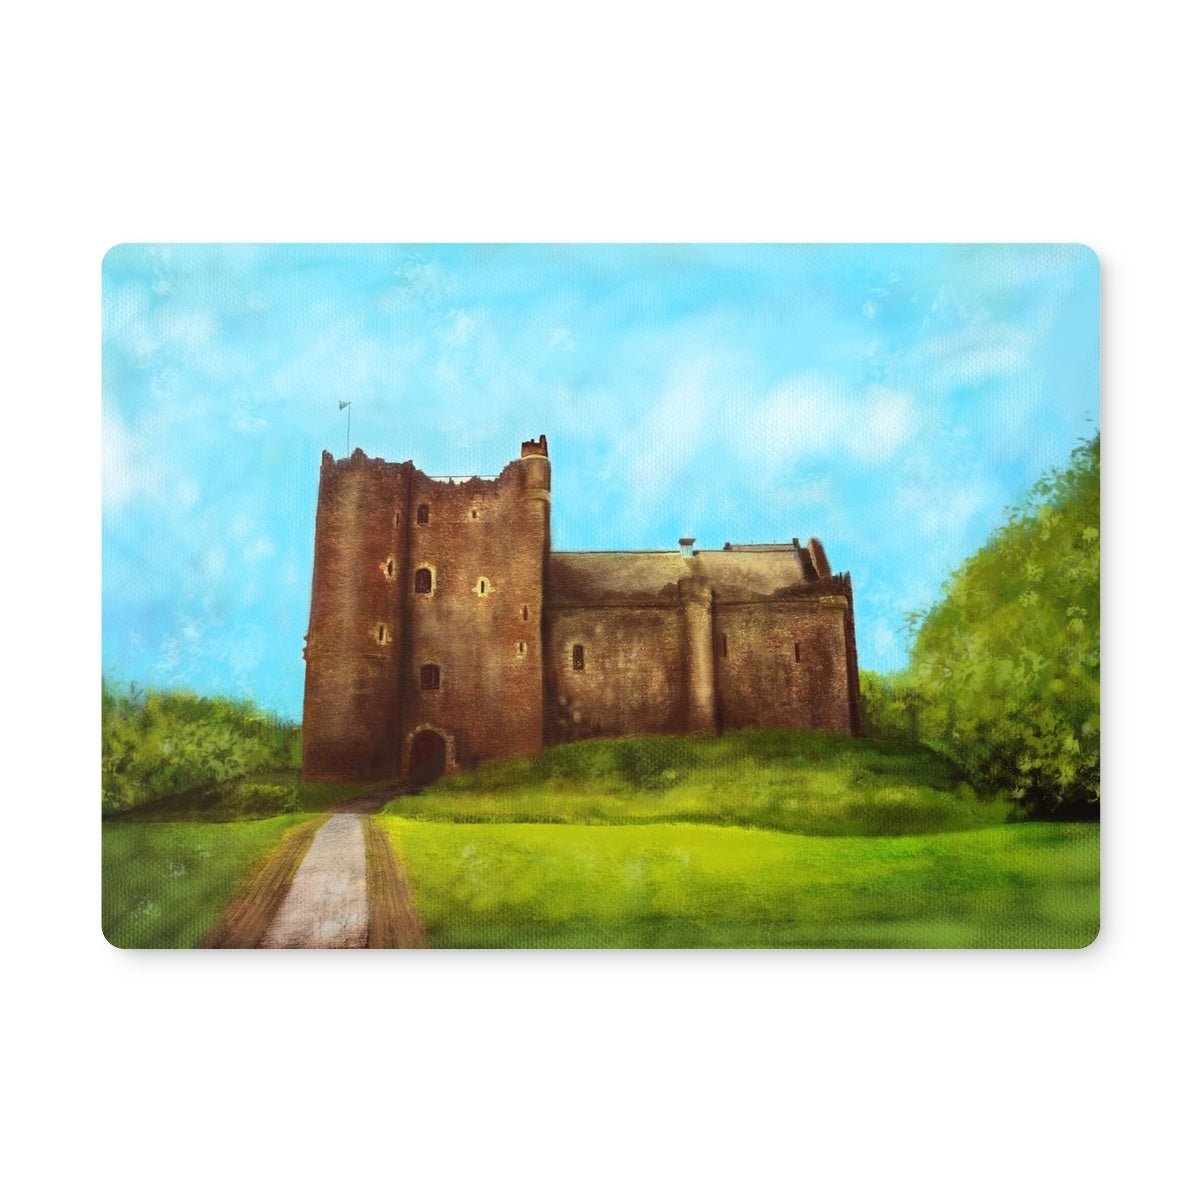 Doune Castle Art Gifts Placemat-Placemats-Scottish Castles Art Gallery-2 Placemats-Paintings, Prints, Homeware, Art Gifts From Scotland By Scottish Artist Kevin Hunter